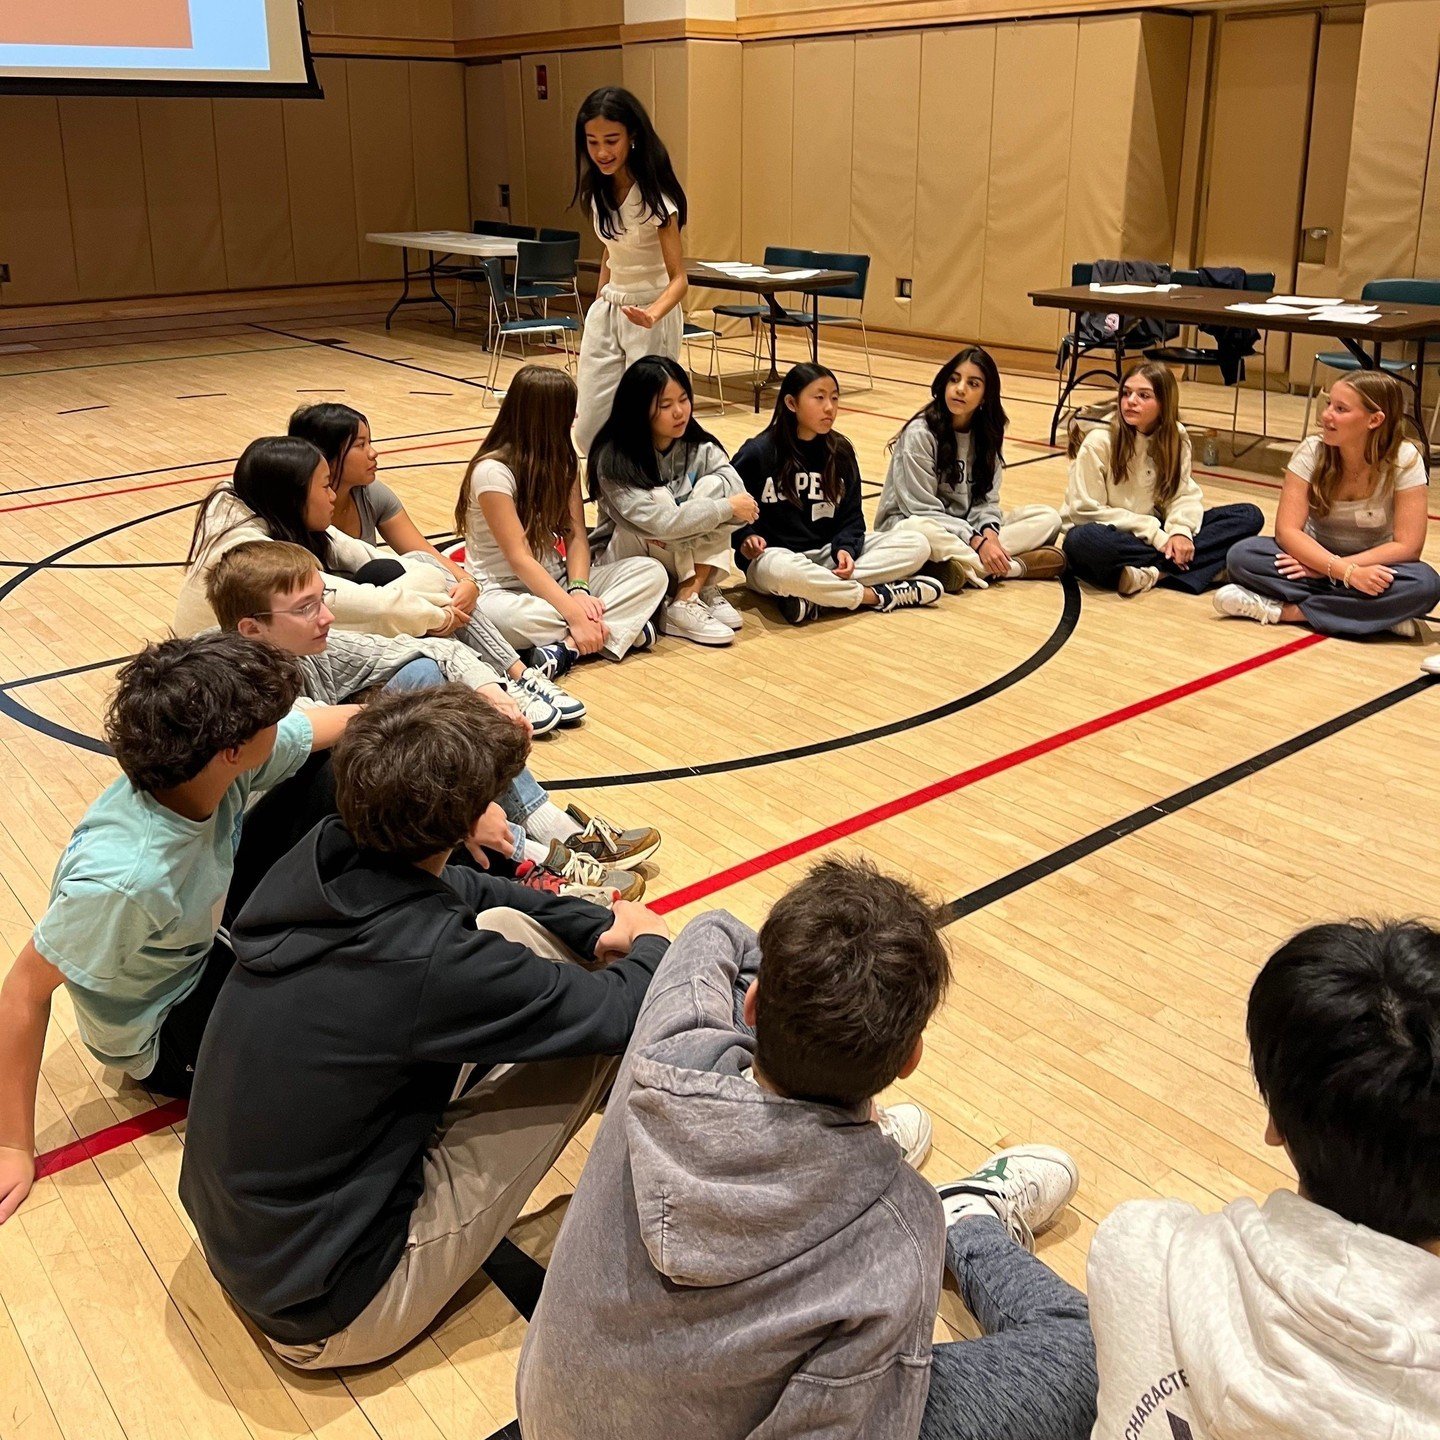 The Grade 8 students from Browning and @BrearleyNYC schools came together for an exchange beyond their classrooms! The boys and girls formed new friendships and fostered community through a variety of activities including debate, origami, drama, and 